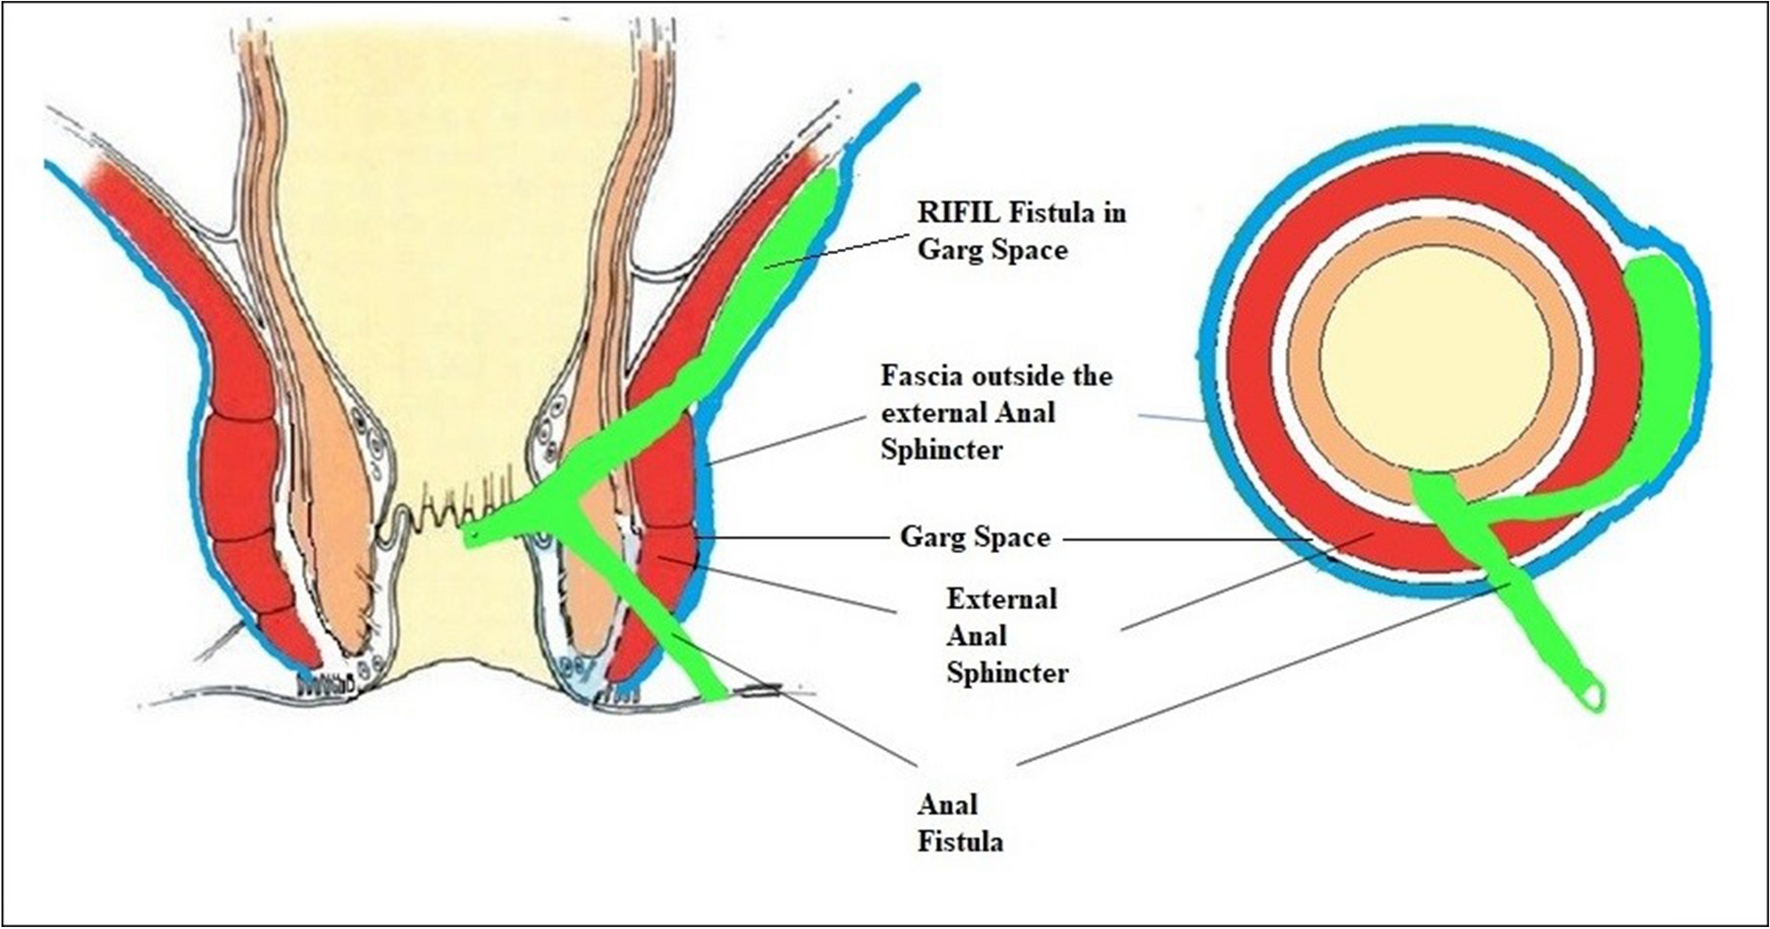 Recent Advances in the Understanding and Management of Anal Fistula from India